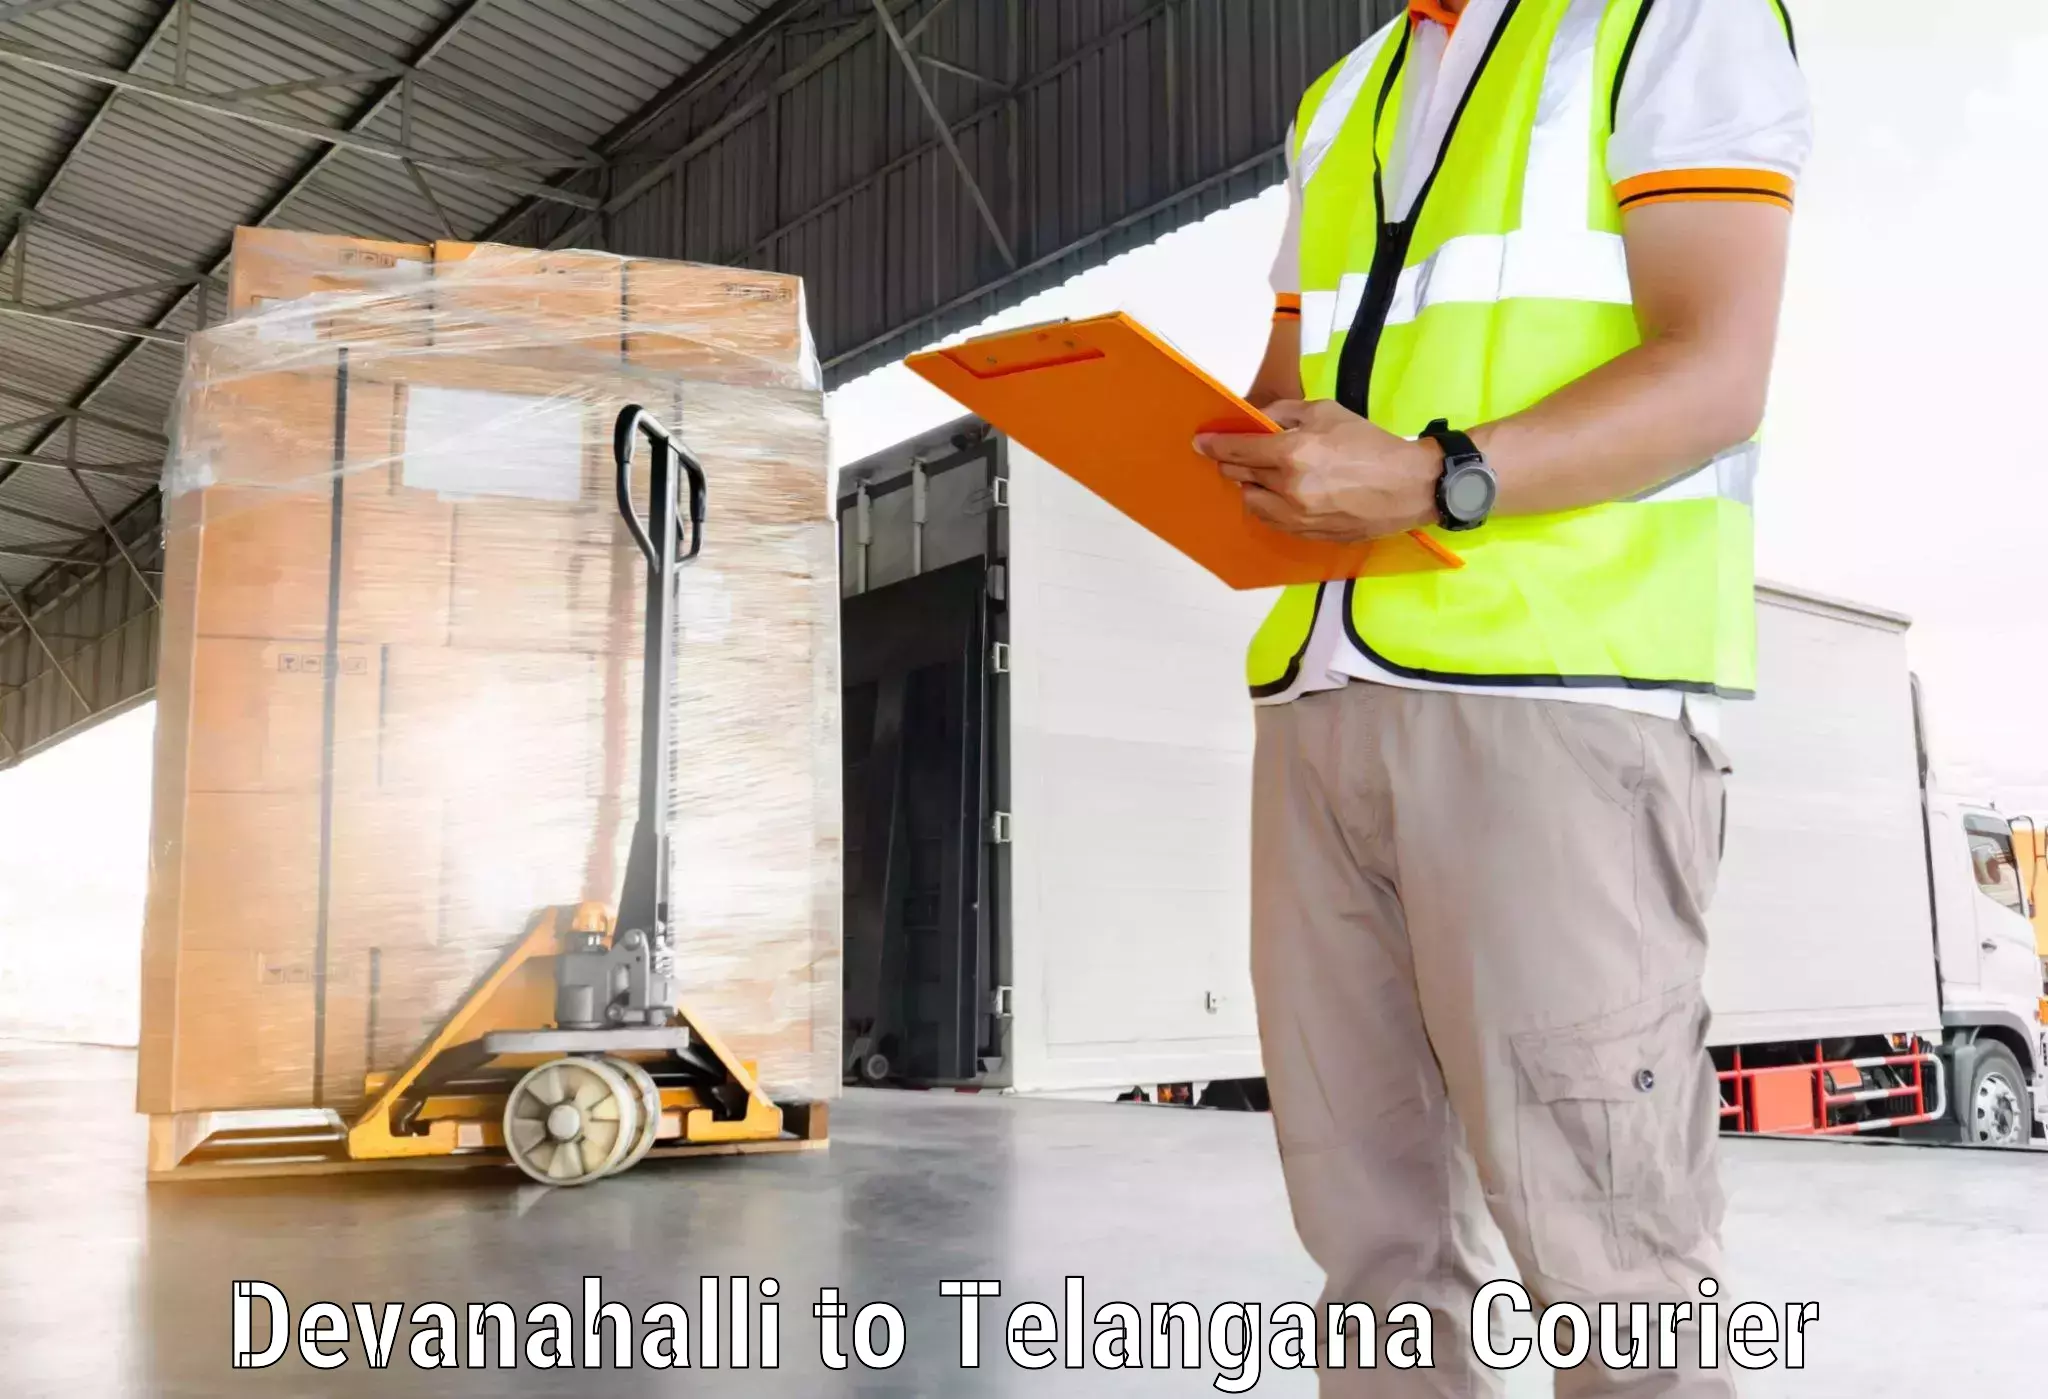 Reliable parcel services in Devanahalli to Gollapalli